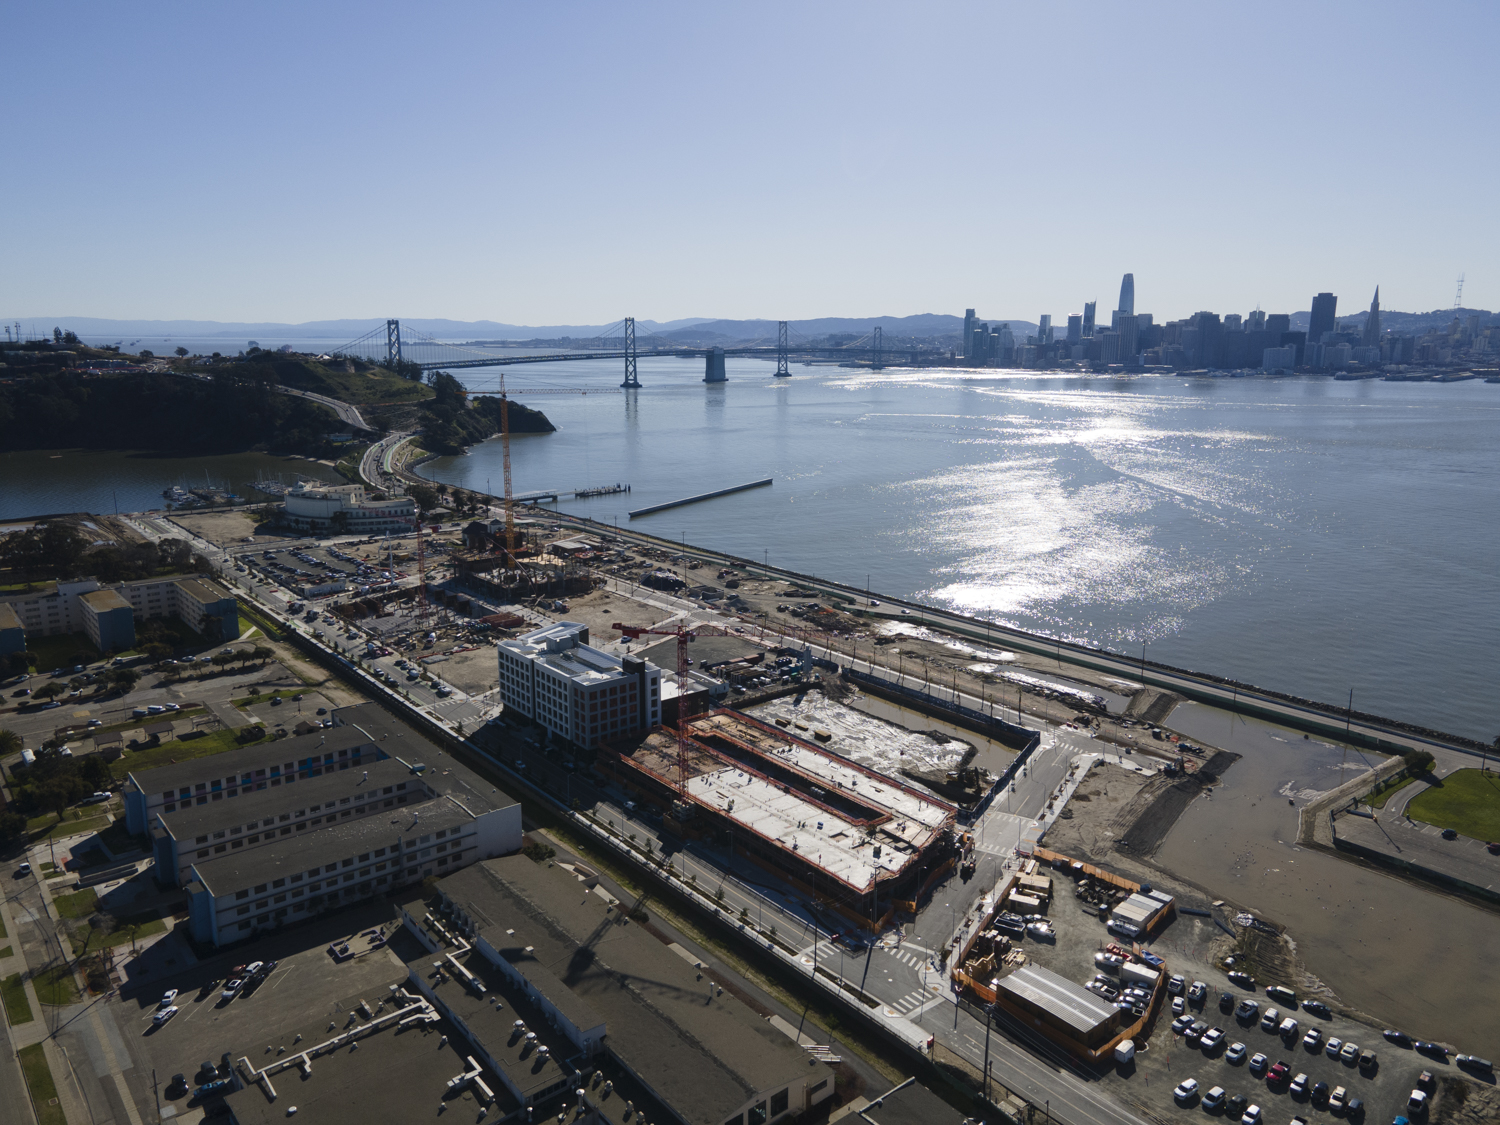 Treasure Island with Star View Court construction in the foreground, image by Andrew Campbell Nelson